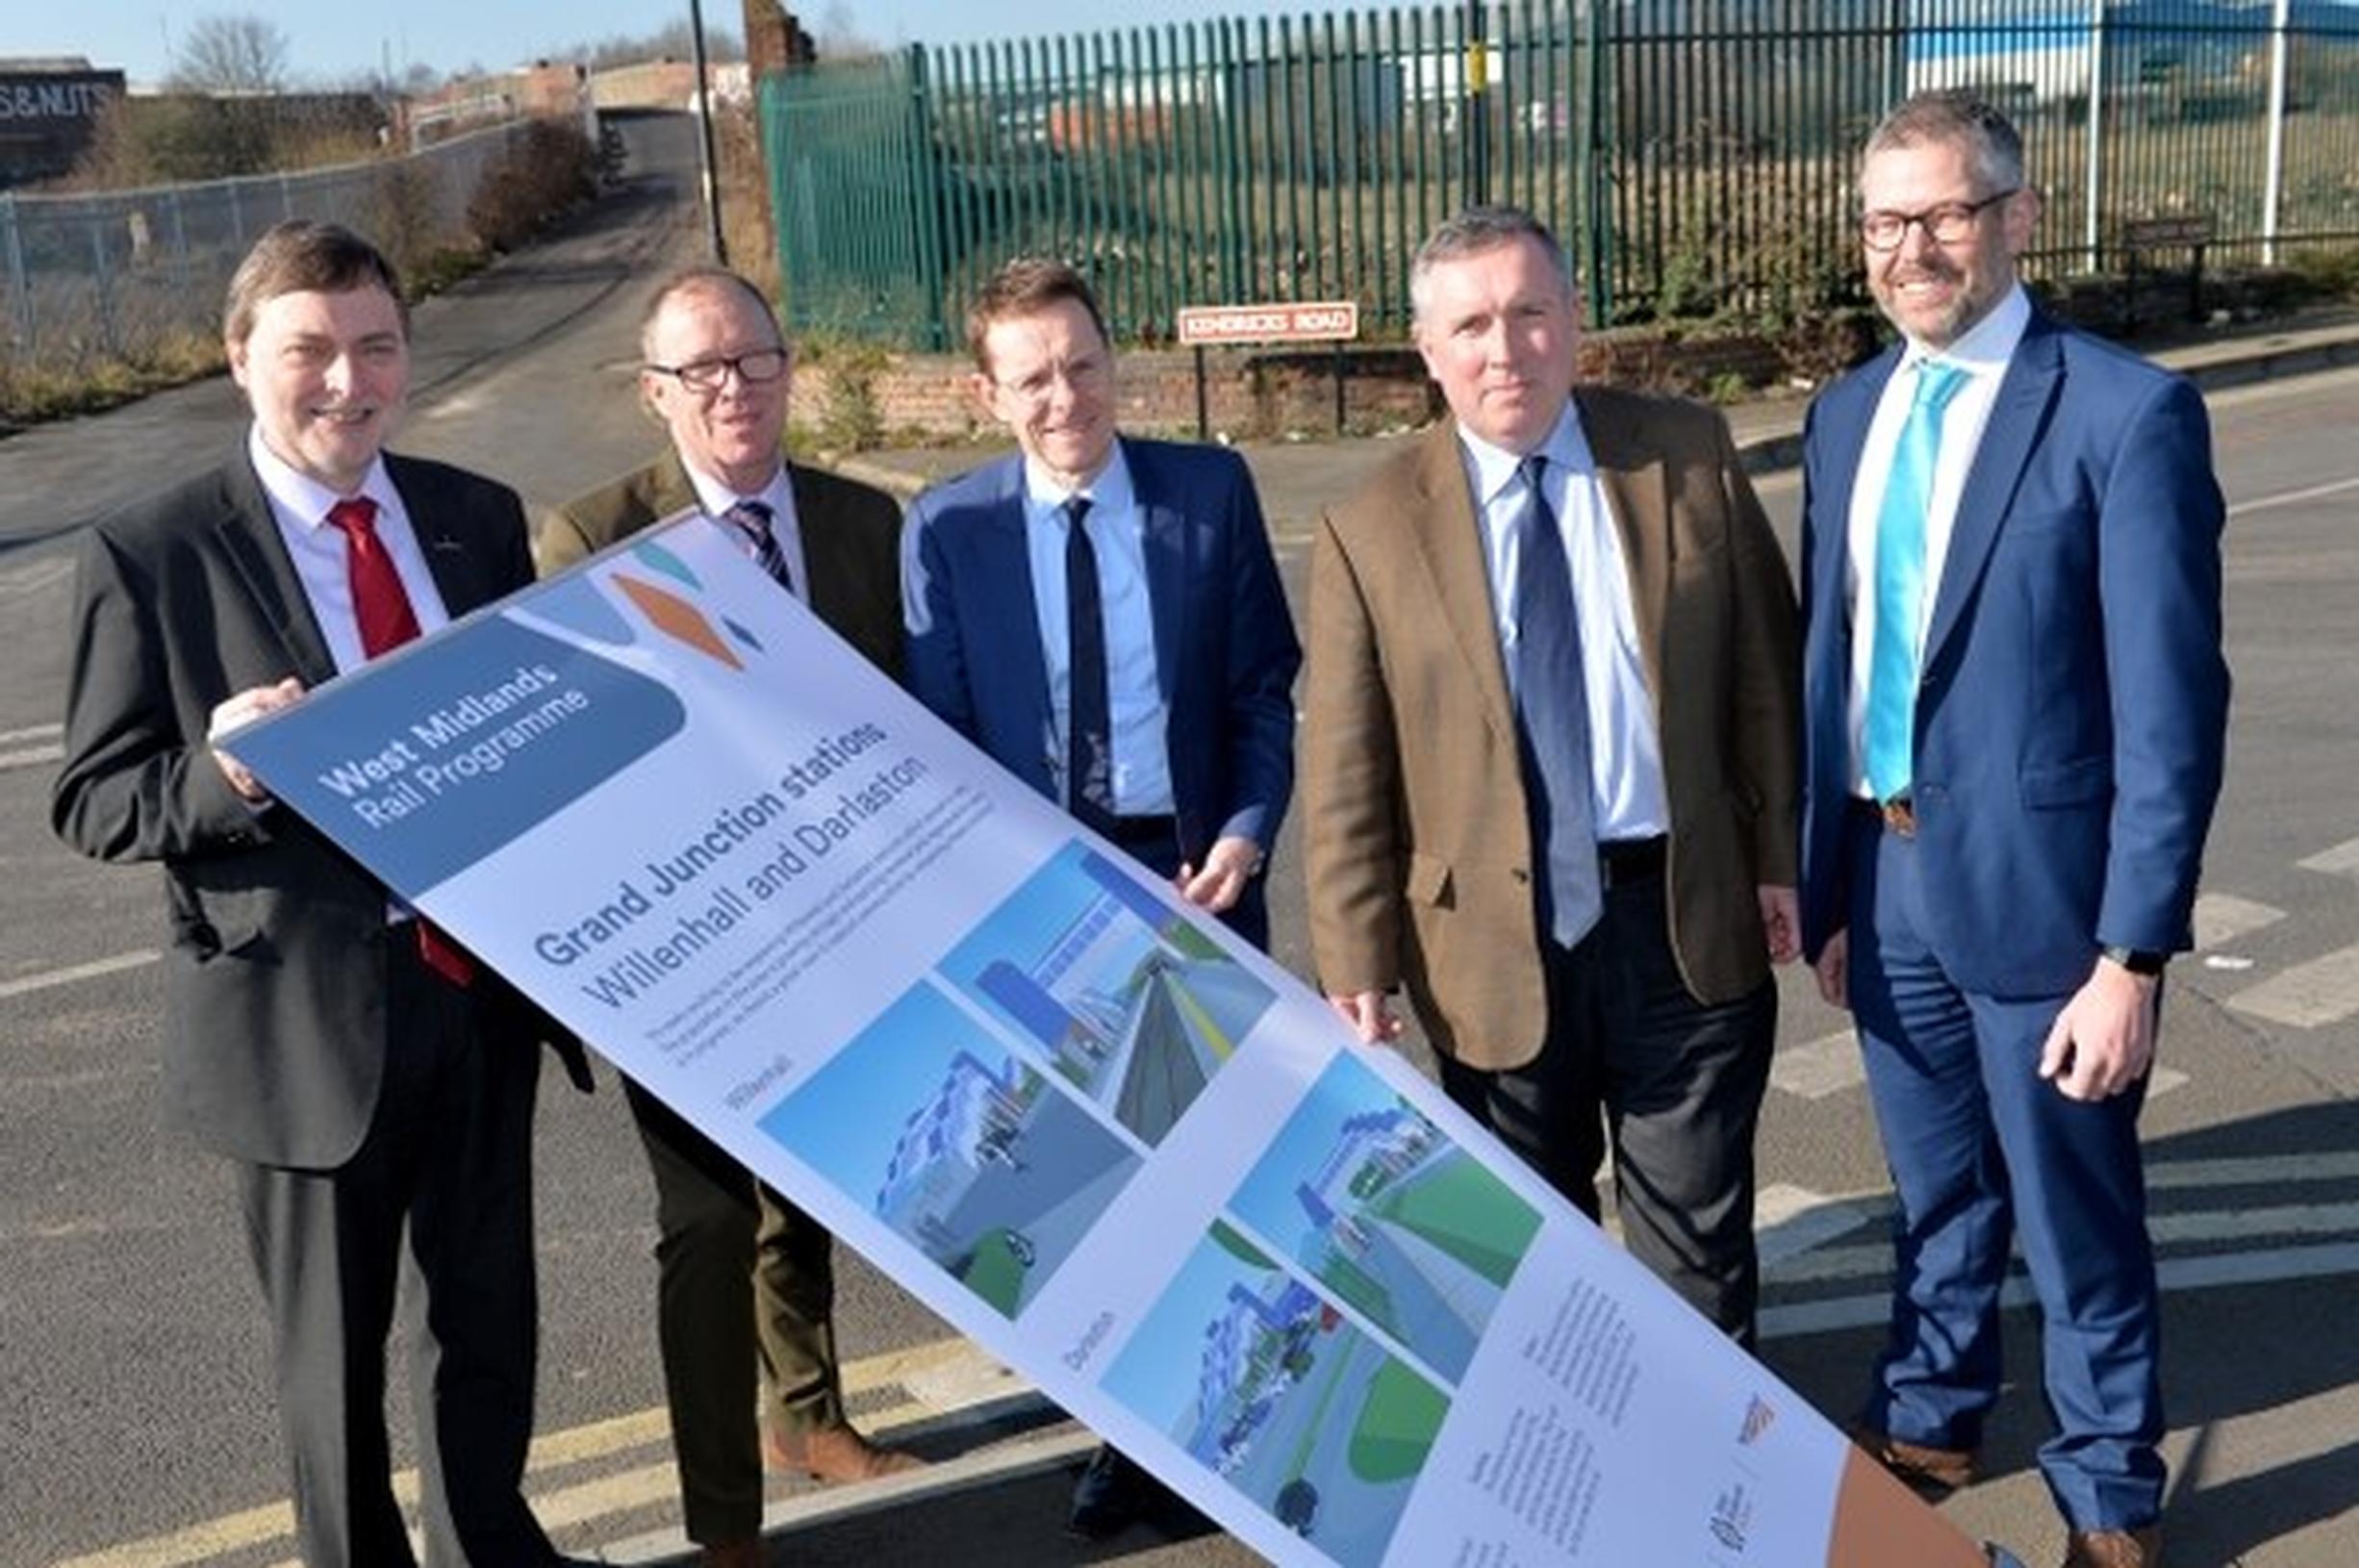 Mayor Andy Street, centre, unveiled the station plans yesterday alongside Councillor John Reynolds, Richard Brooks from Transport for West Midlands, Councillor Adrian Andrew and Malcolm Holmes, from the transport executive